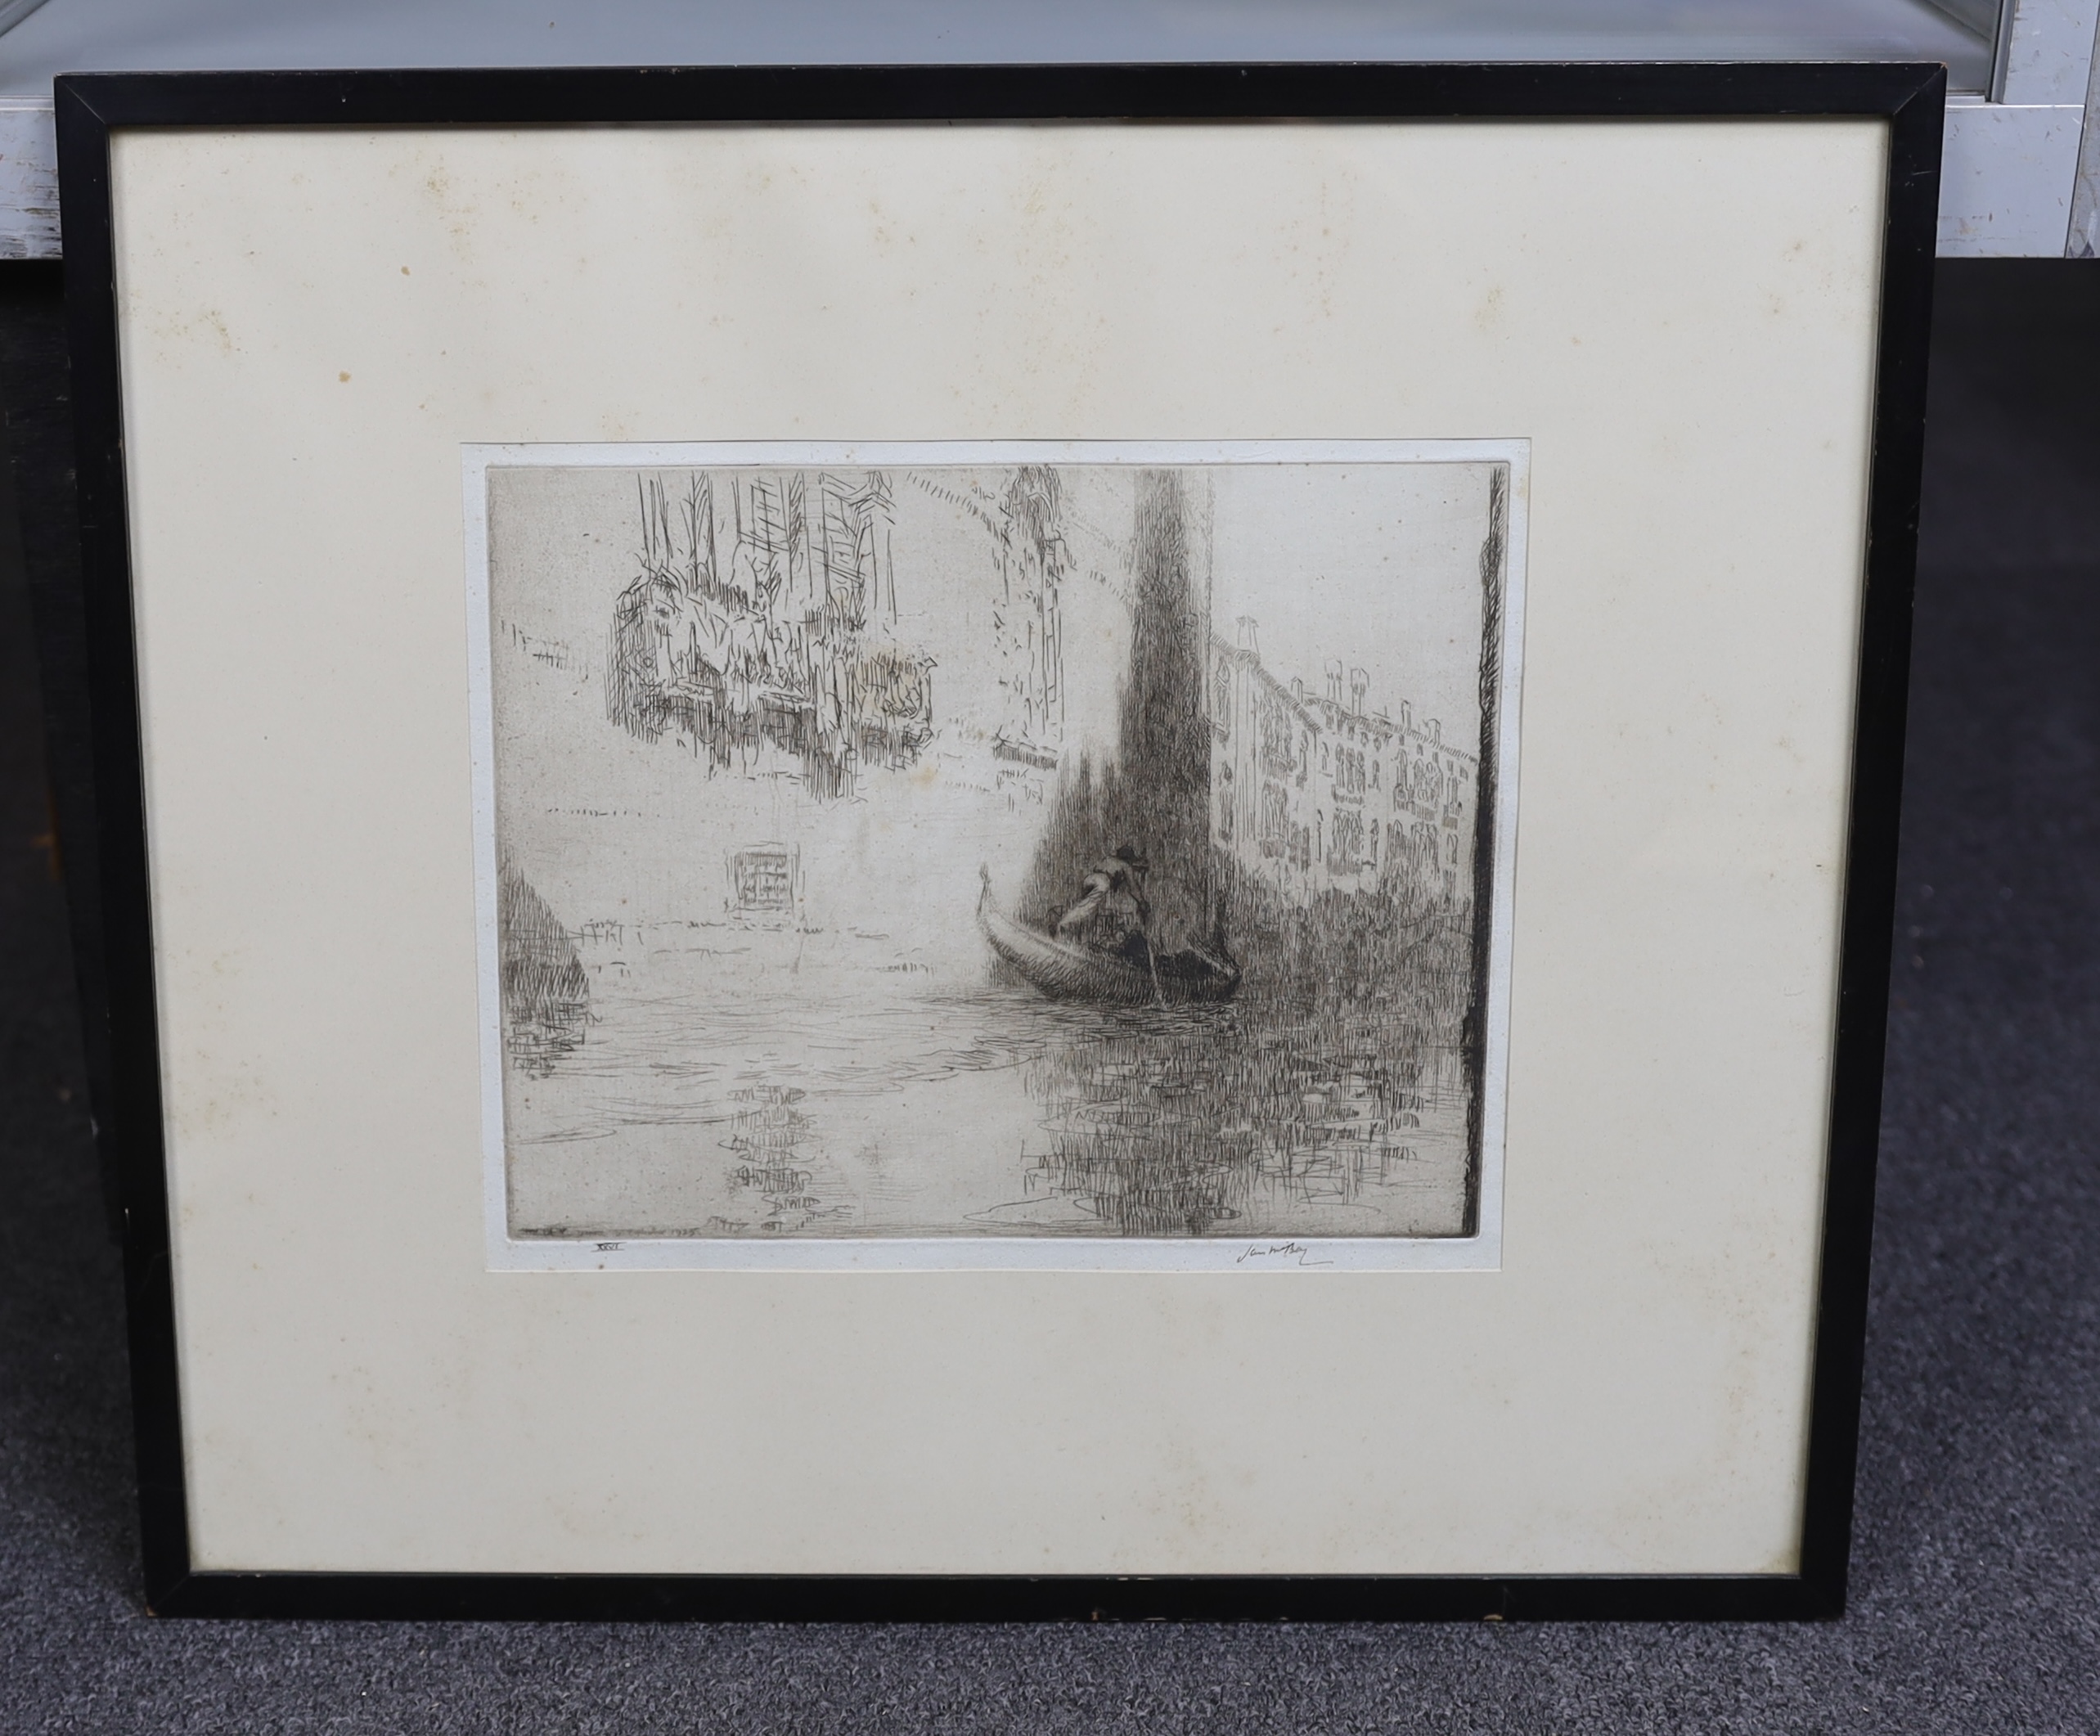 James McBey (Scottish, 1883-1959), dry point etching, 'The Passing Gondola', signed in ink and numbered XXVI, 21 x 26.5cm. Condition - fair